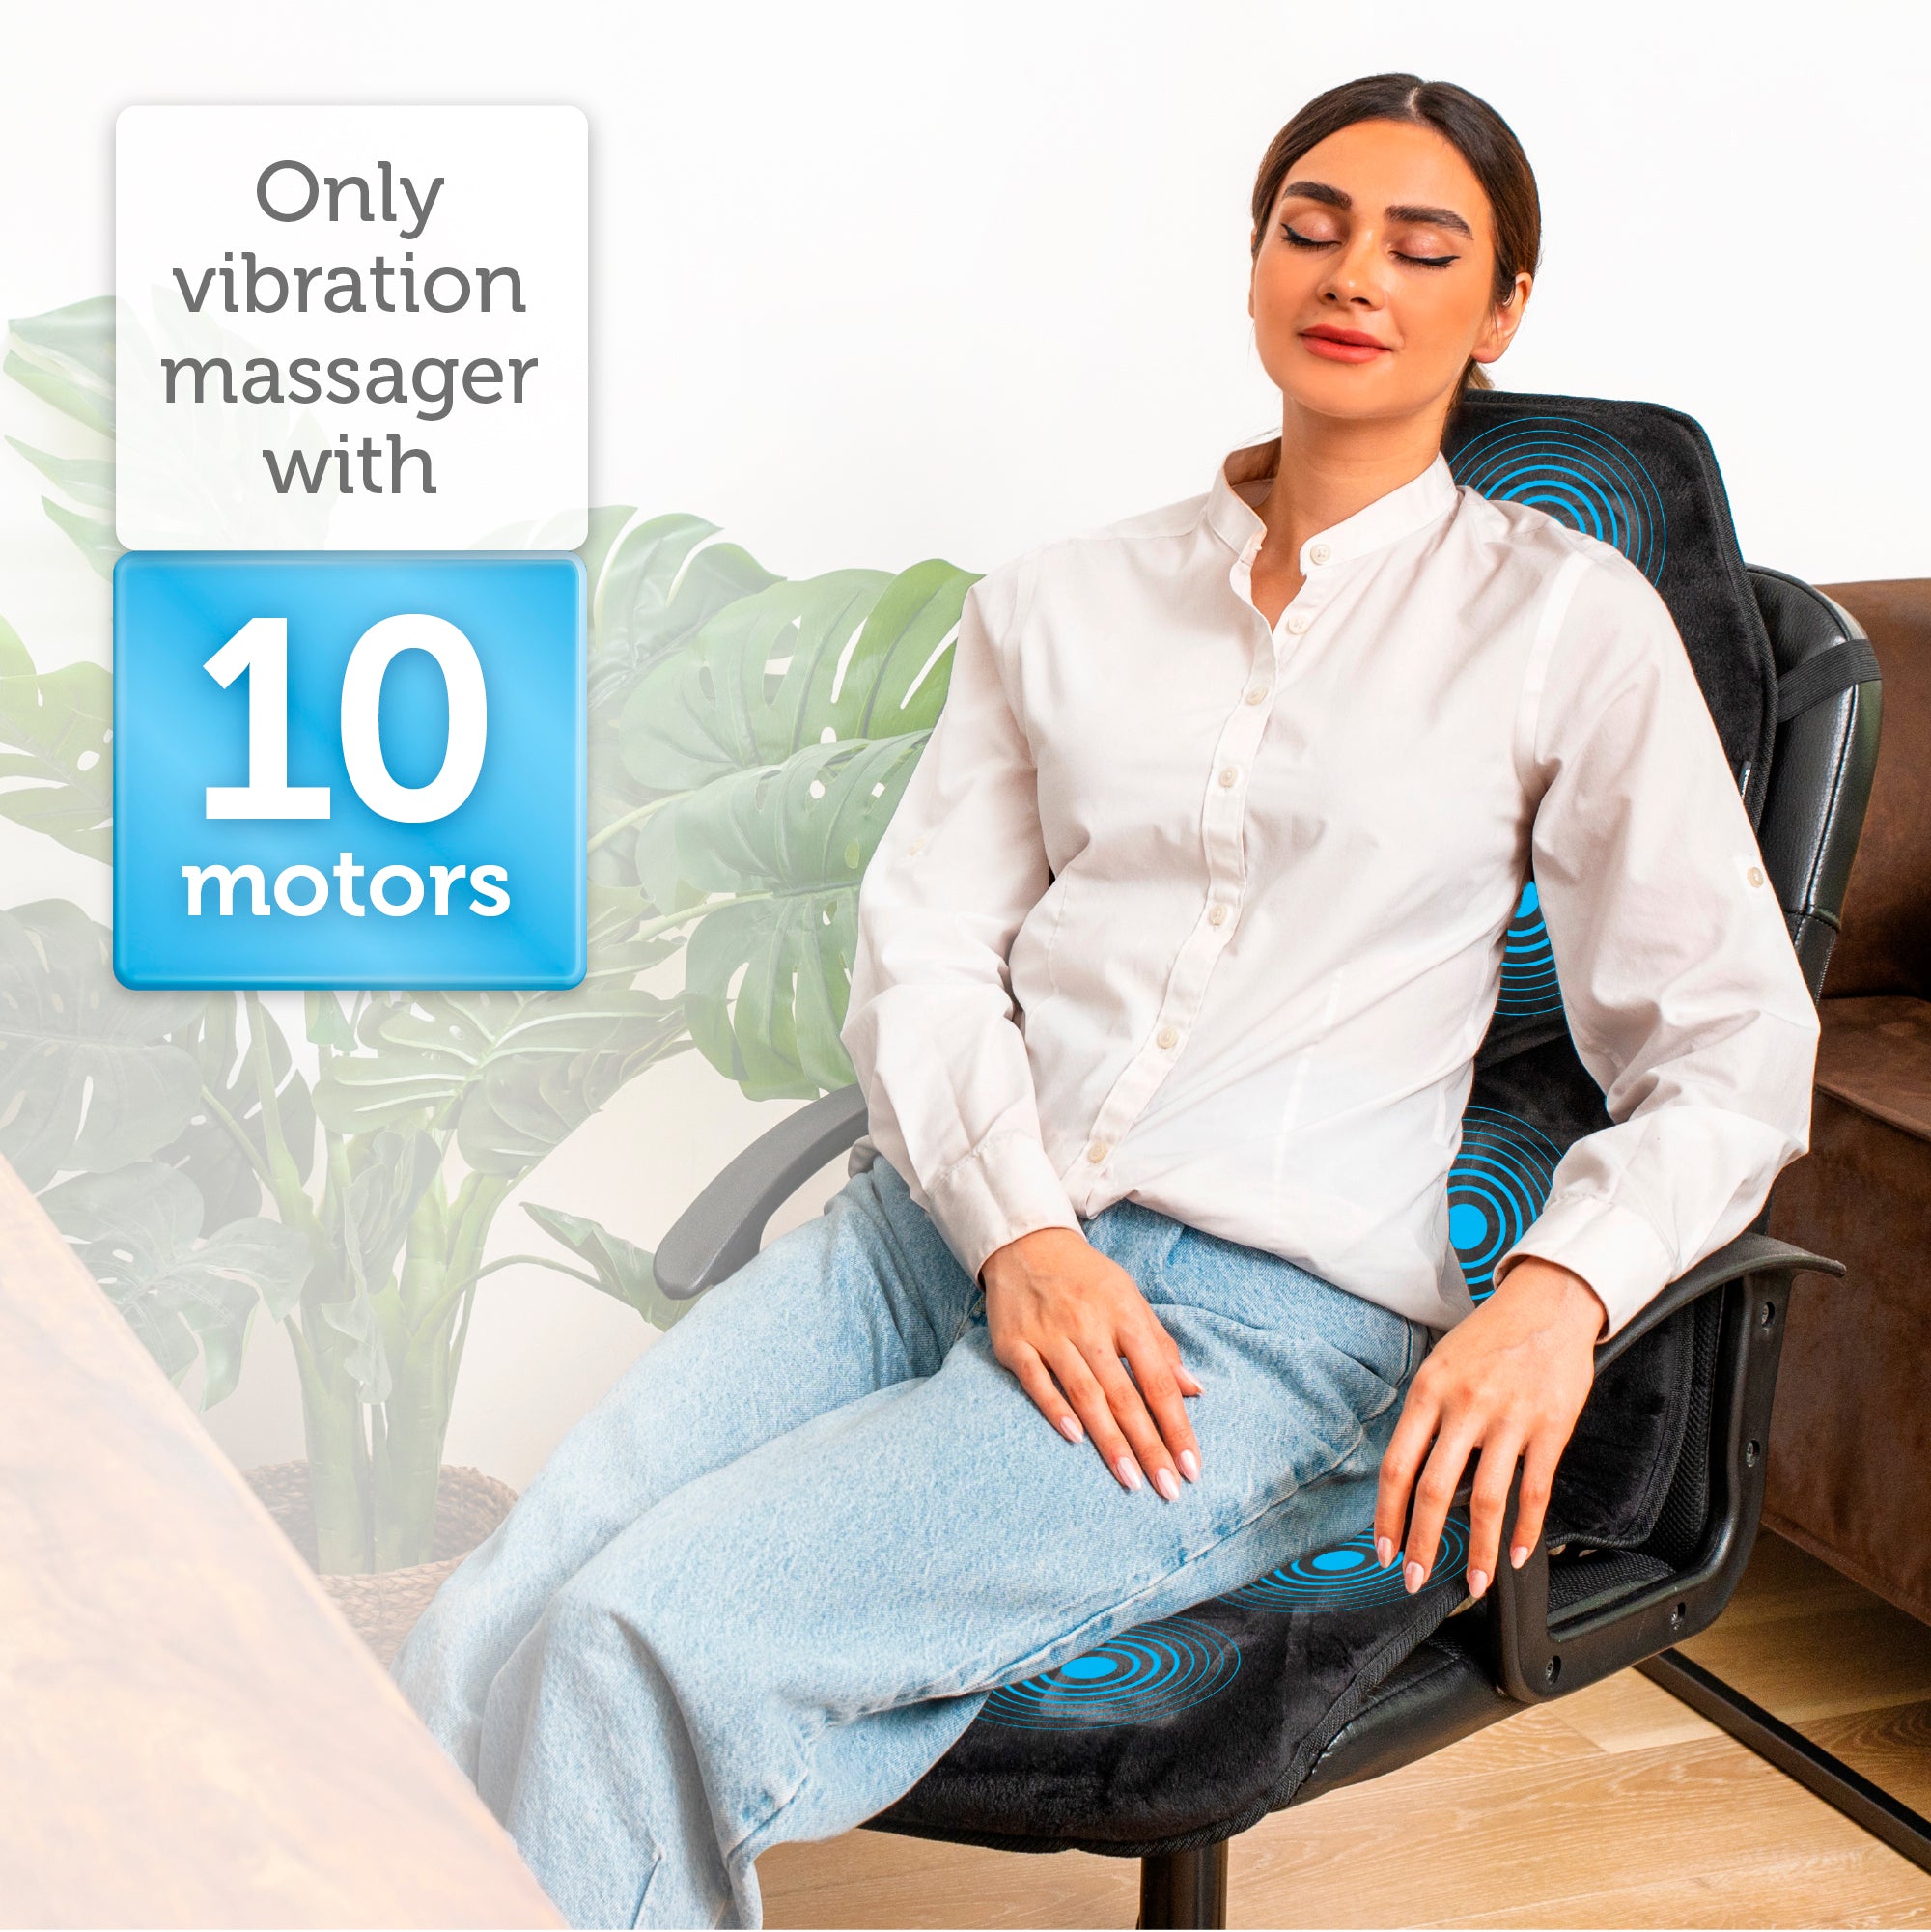 Comfier Back Massager for Pain Relief, Lumbar Black Support Pillow, 3 Massage Modes 2 Heat Levels, Cushion for Office Chair, Car, Recliner, Gifts